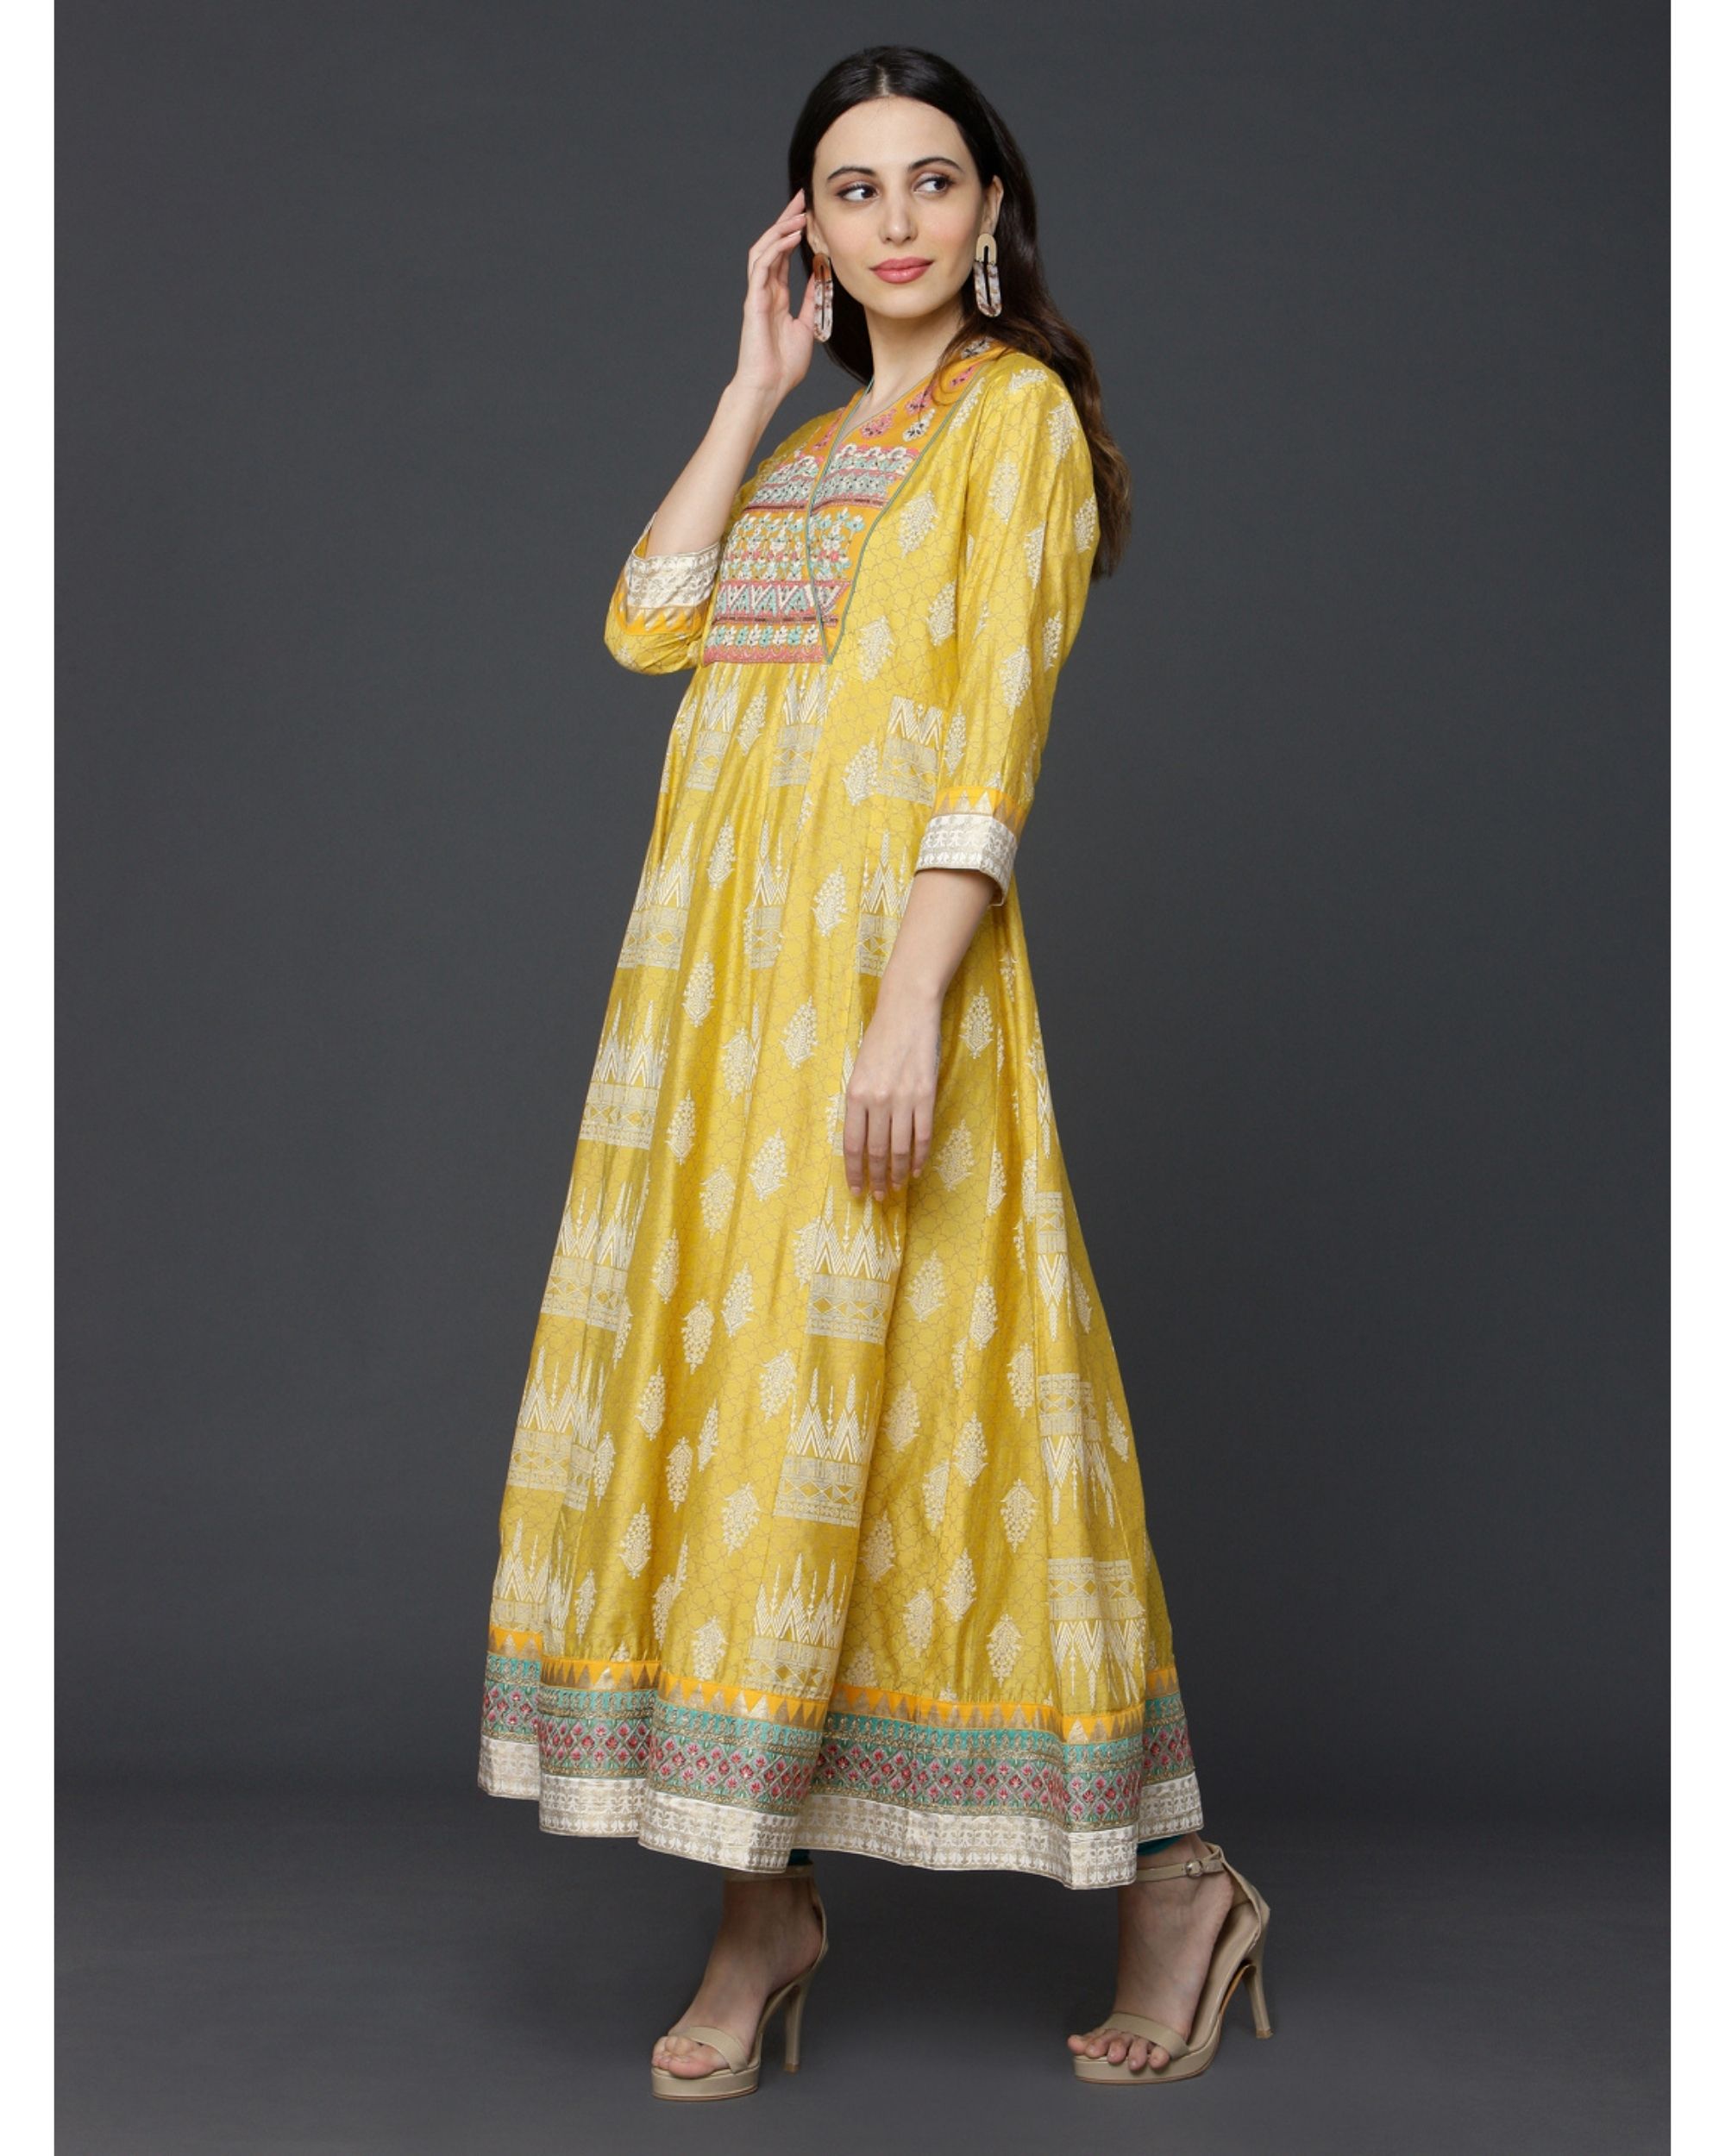 Yellow yoke embroidered anarkali by Ojas Designs | The Secret Label